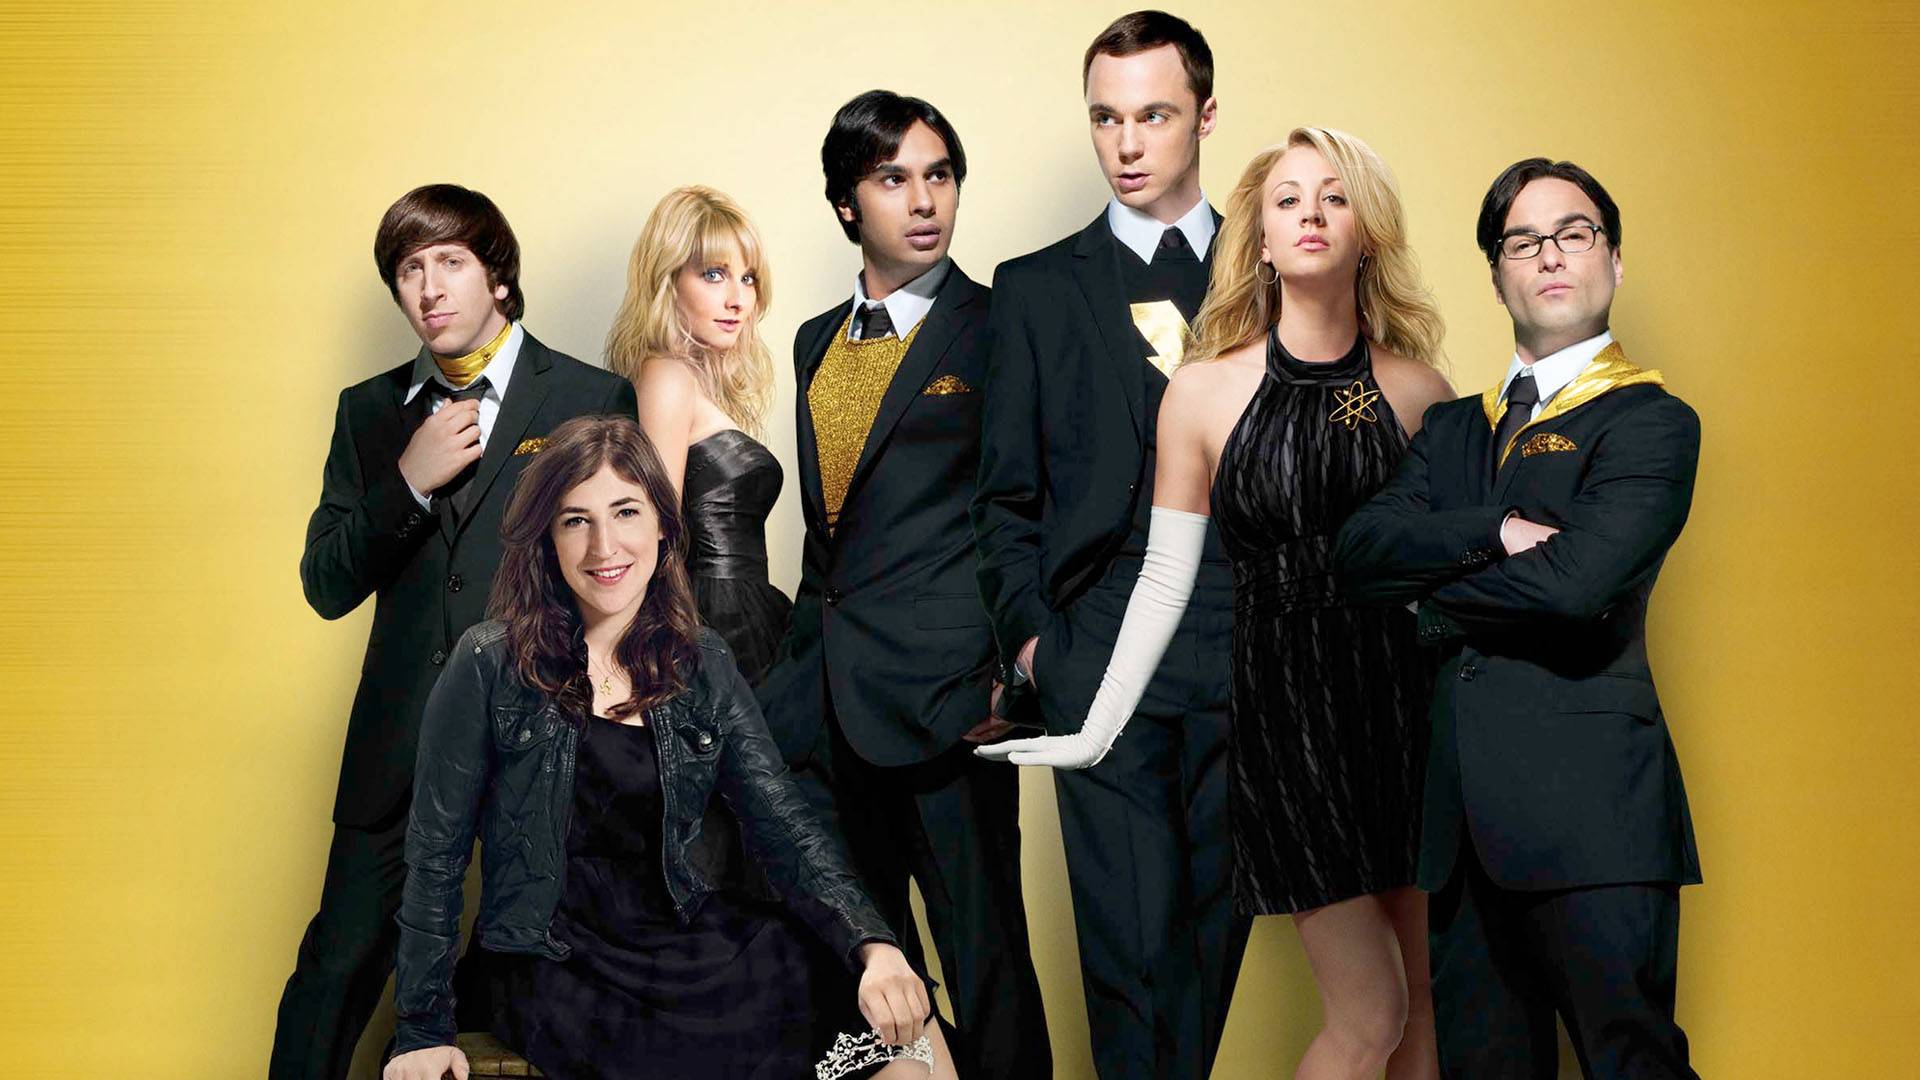 The Big Bang Theory Full HD Widescreen wallpapers for